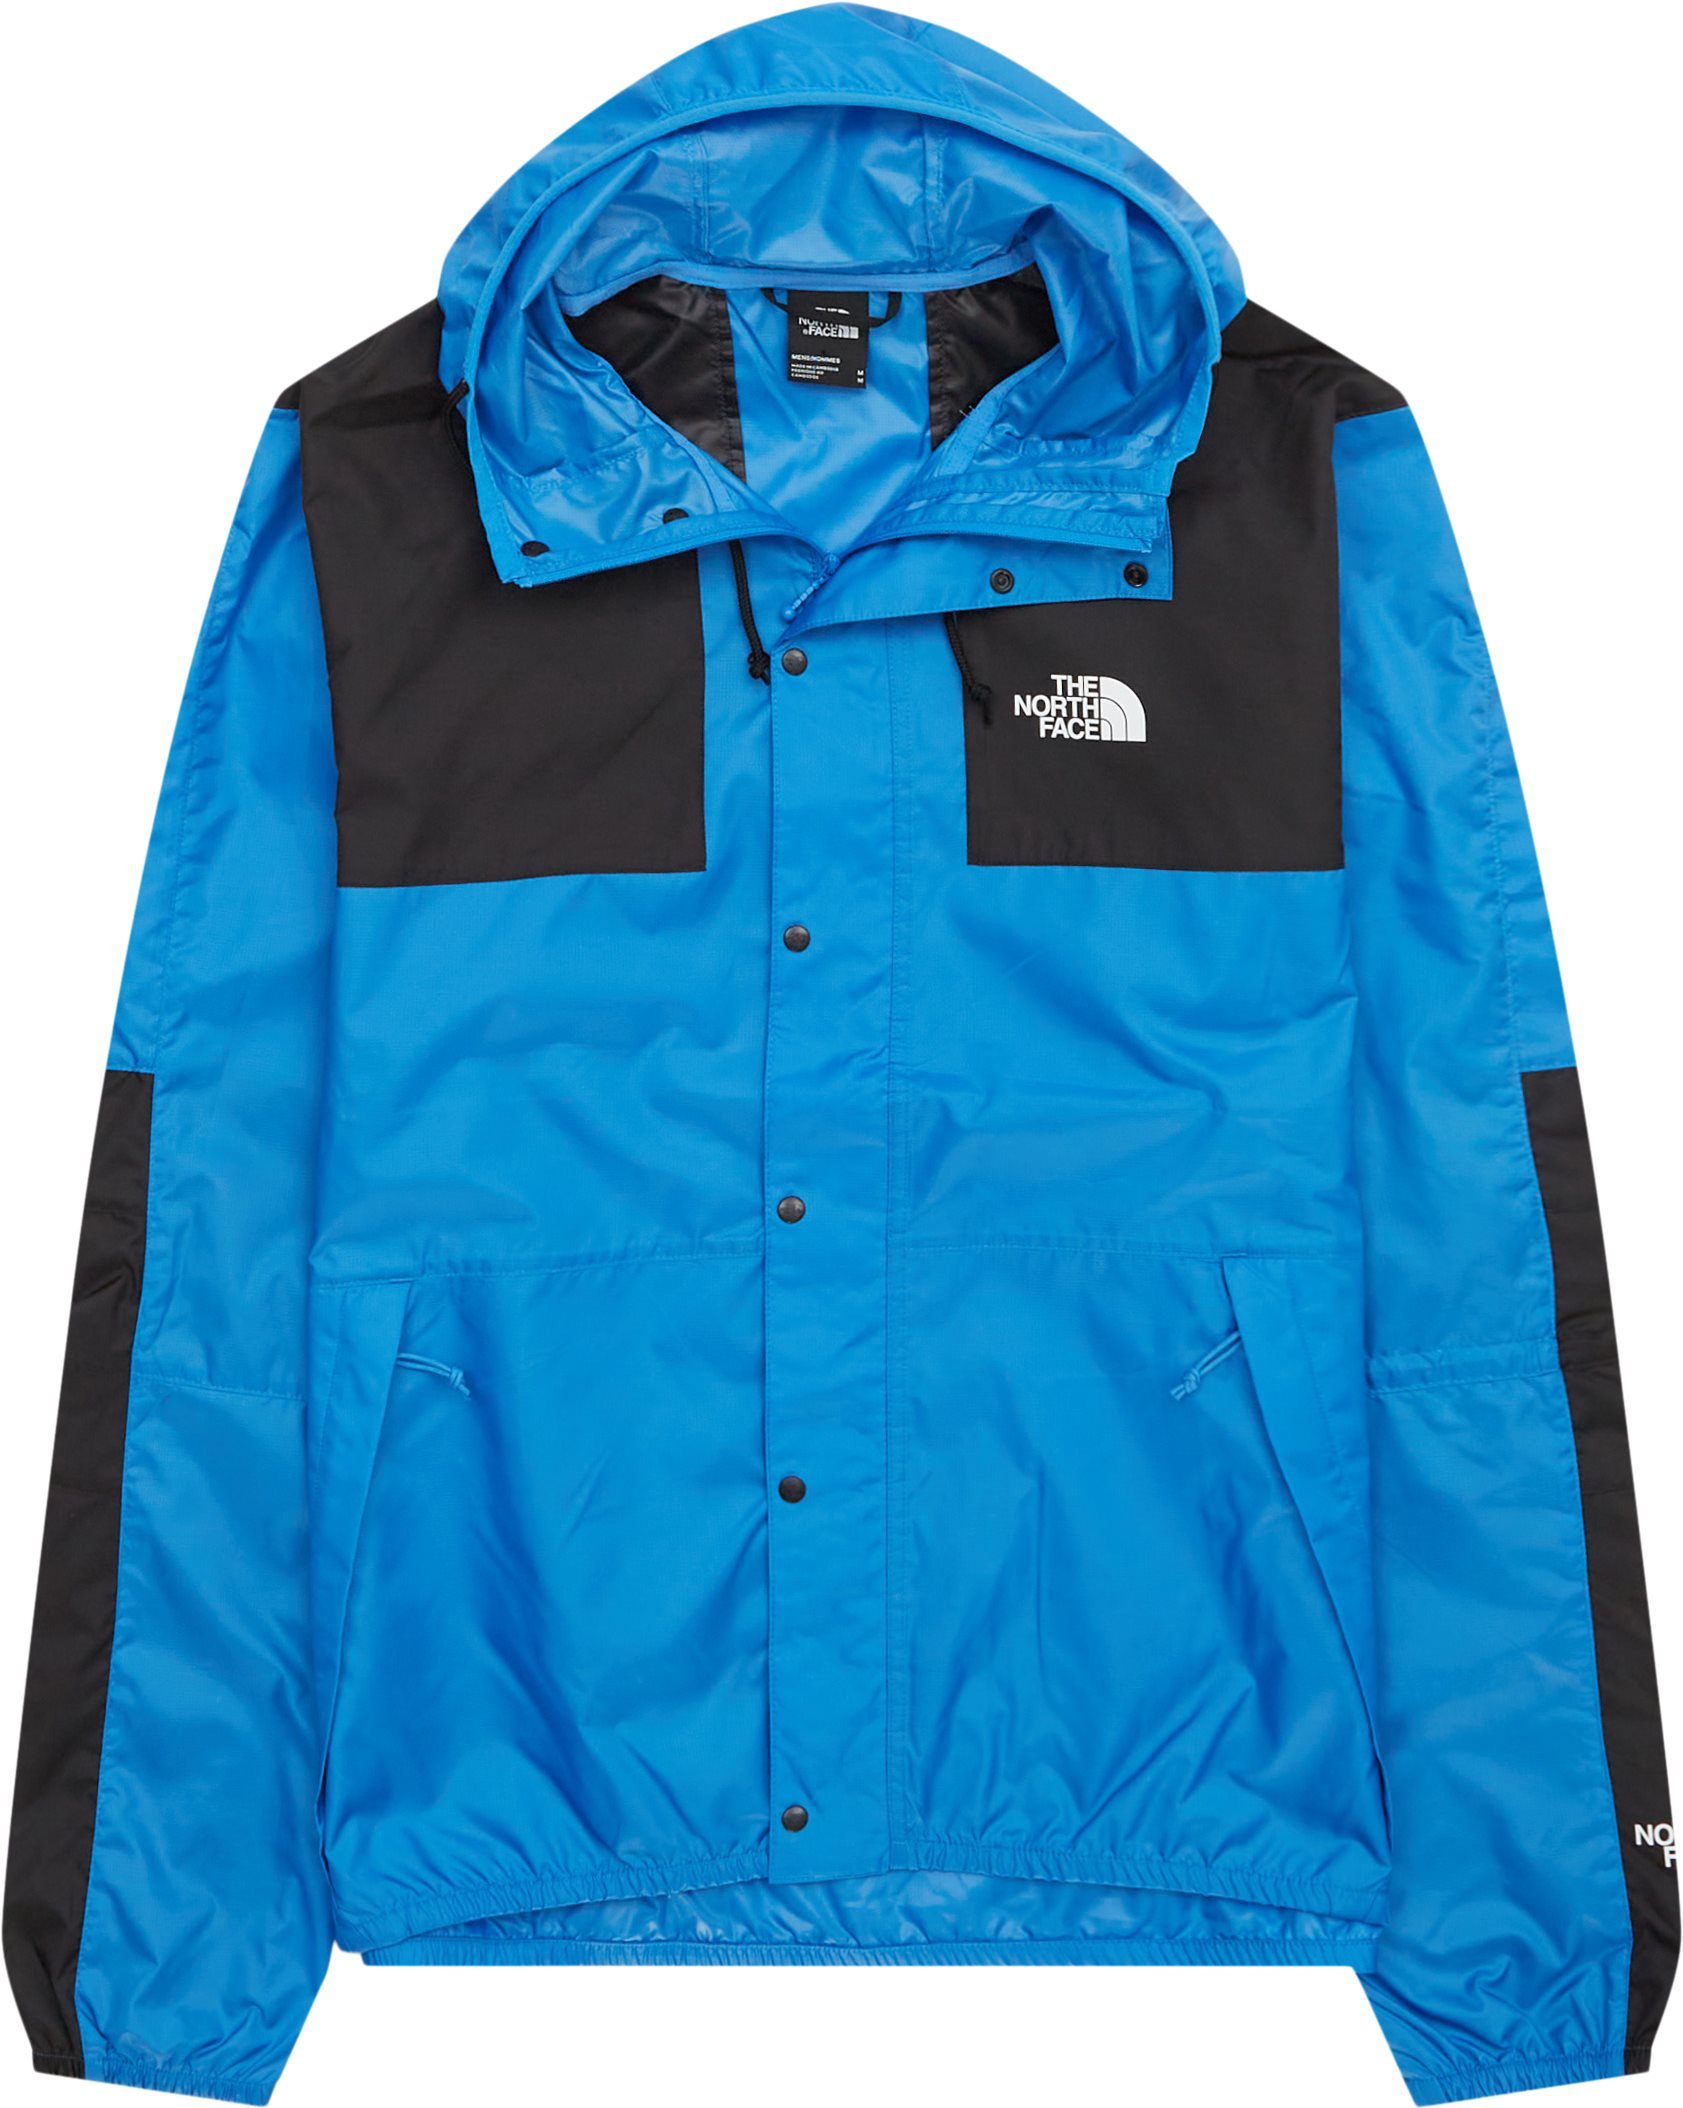 The North Face Jackets SEASONAL MOUNTAIN JACKET NF0A5IG3L Blue